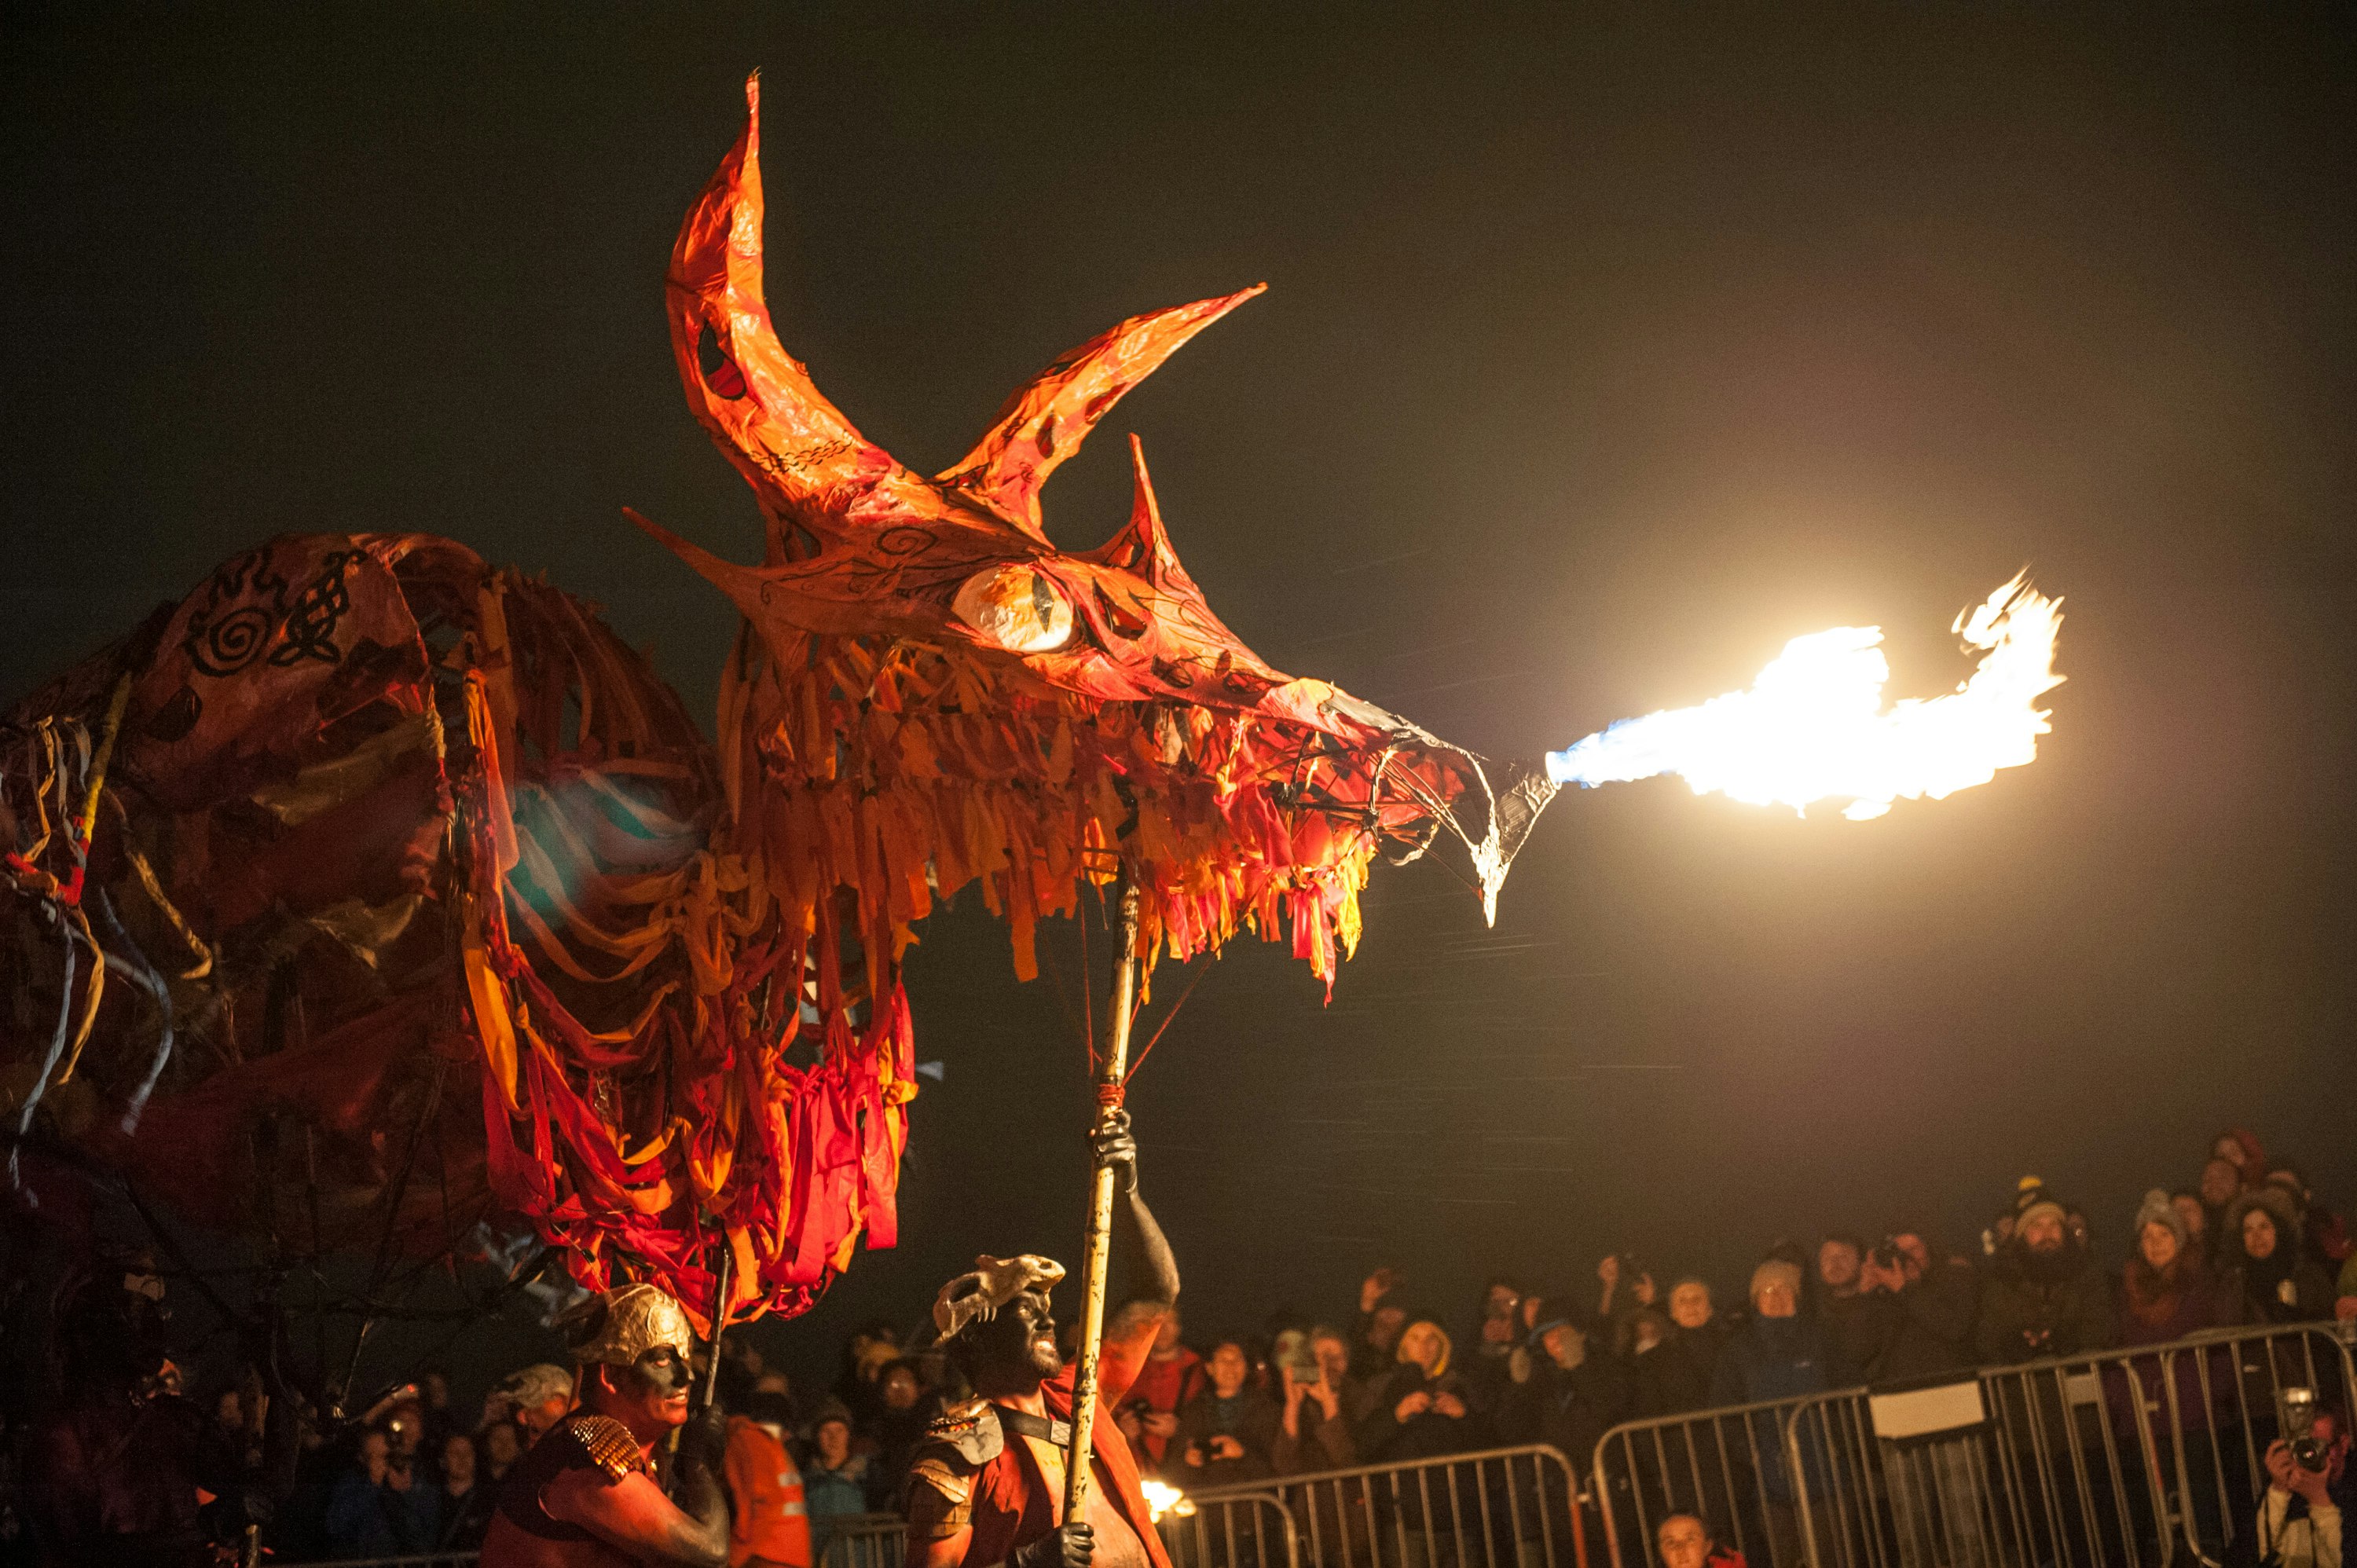 A fire-breathing dragon puppet made of cloth pieces in orange, pink, and read draped over a wooden frame is held aloft by performers in body paint and masks. In the background are metal security barriers and a crowd of observers.